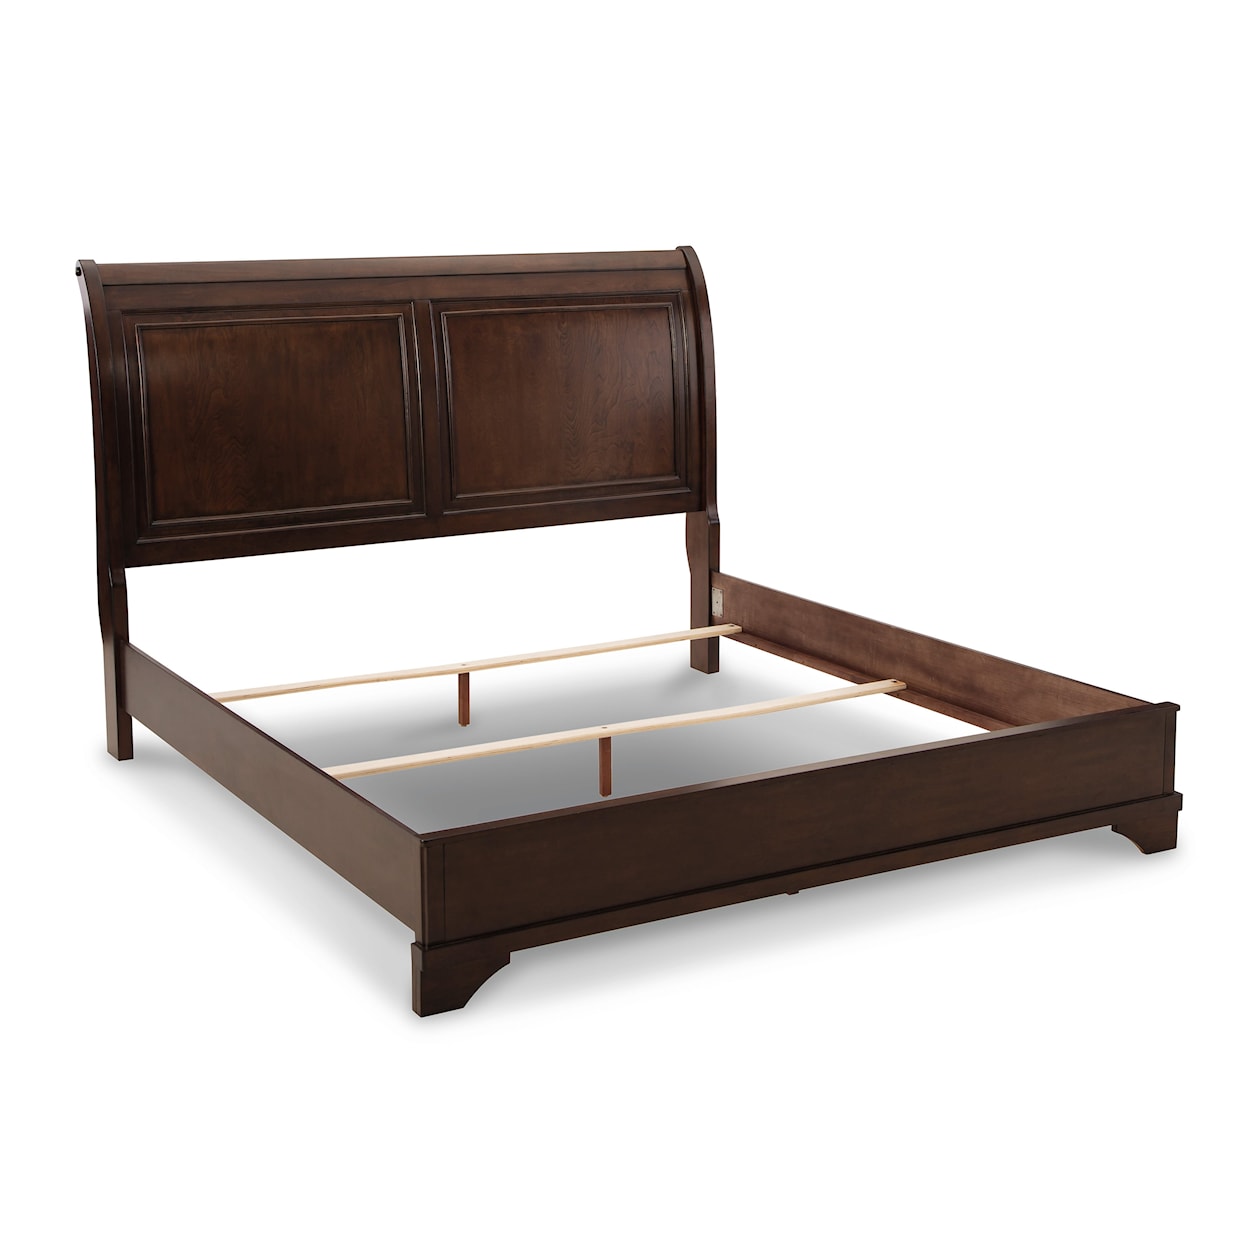 Signature Design by Ashley Brookbauer King Sleigh Bed